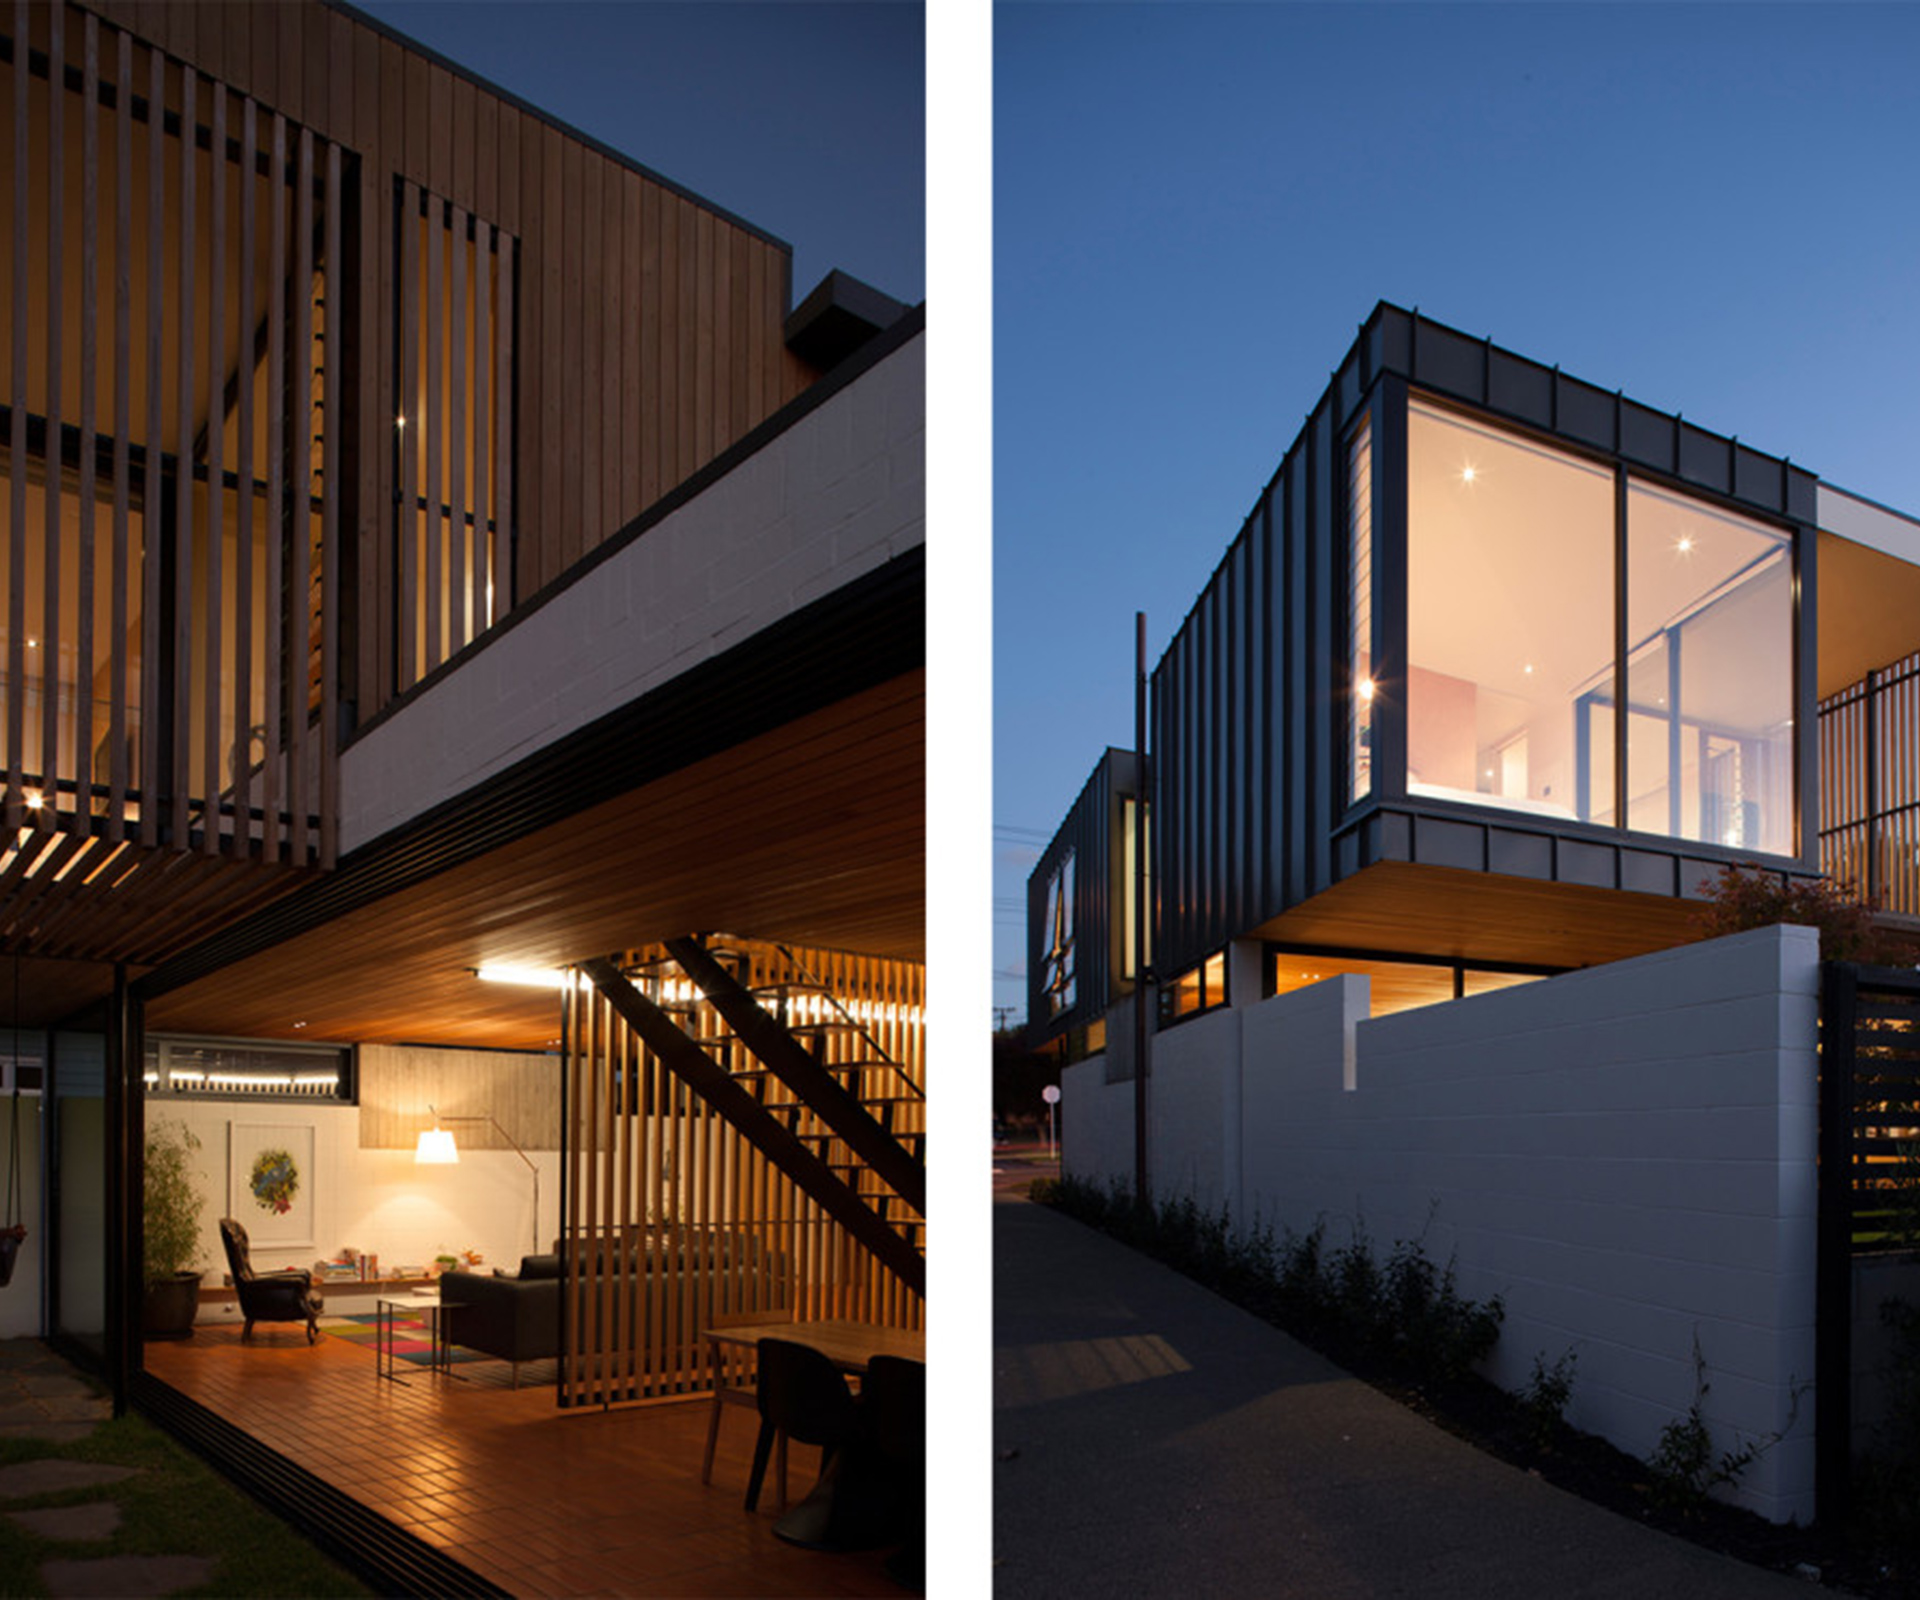 The main living areas of this Auckland family home (left) are located downstairs and open onto a grassy courtyard. The home is designed to sit hard against the driveway of the neighbouring property, while carefully directing views to the lawn outside and, from the upper floor, the harbou­r beyond (right). 